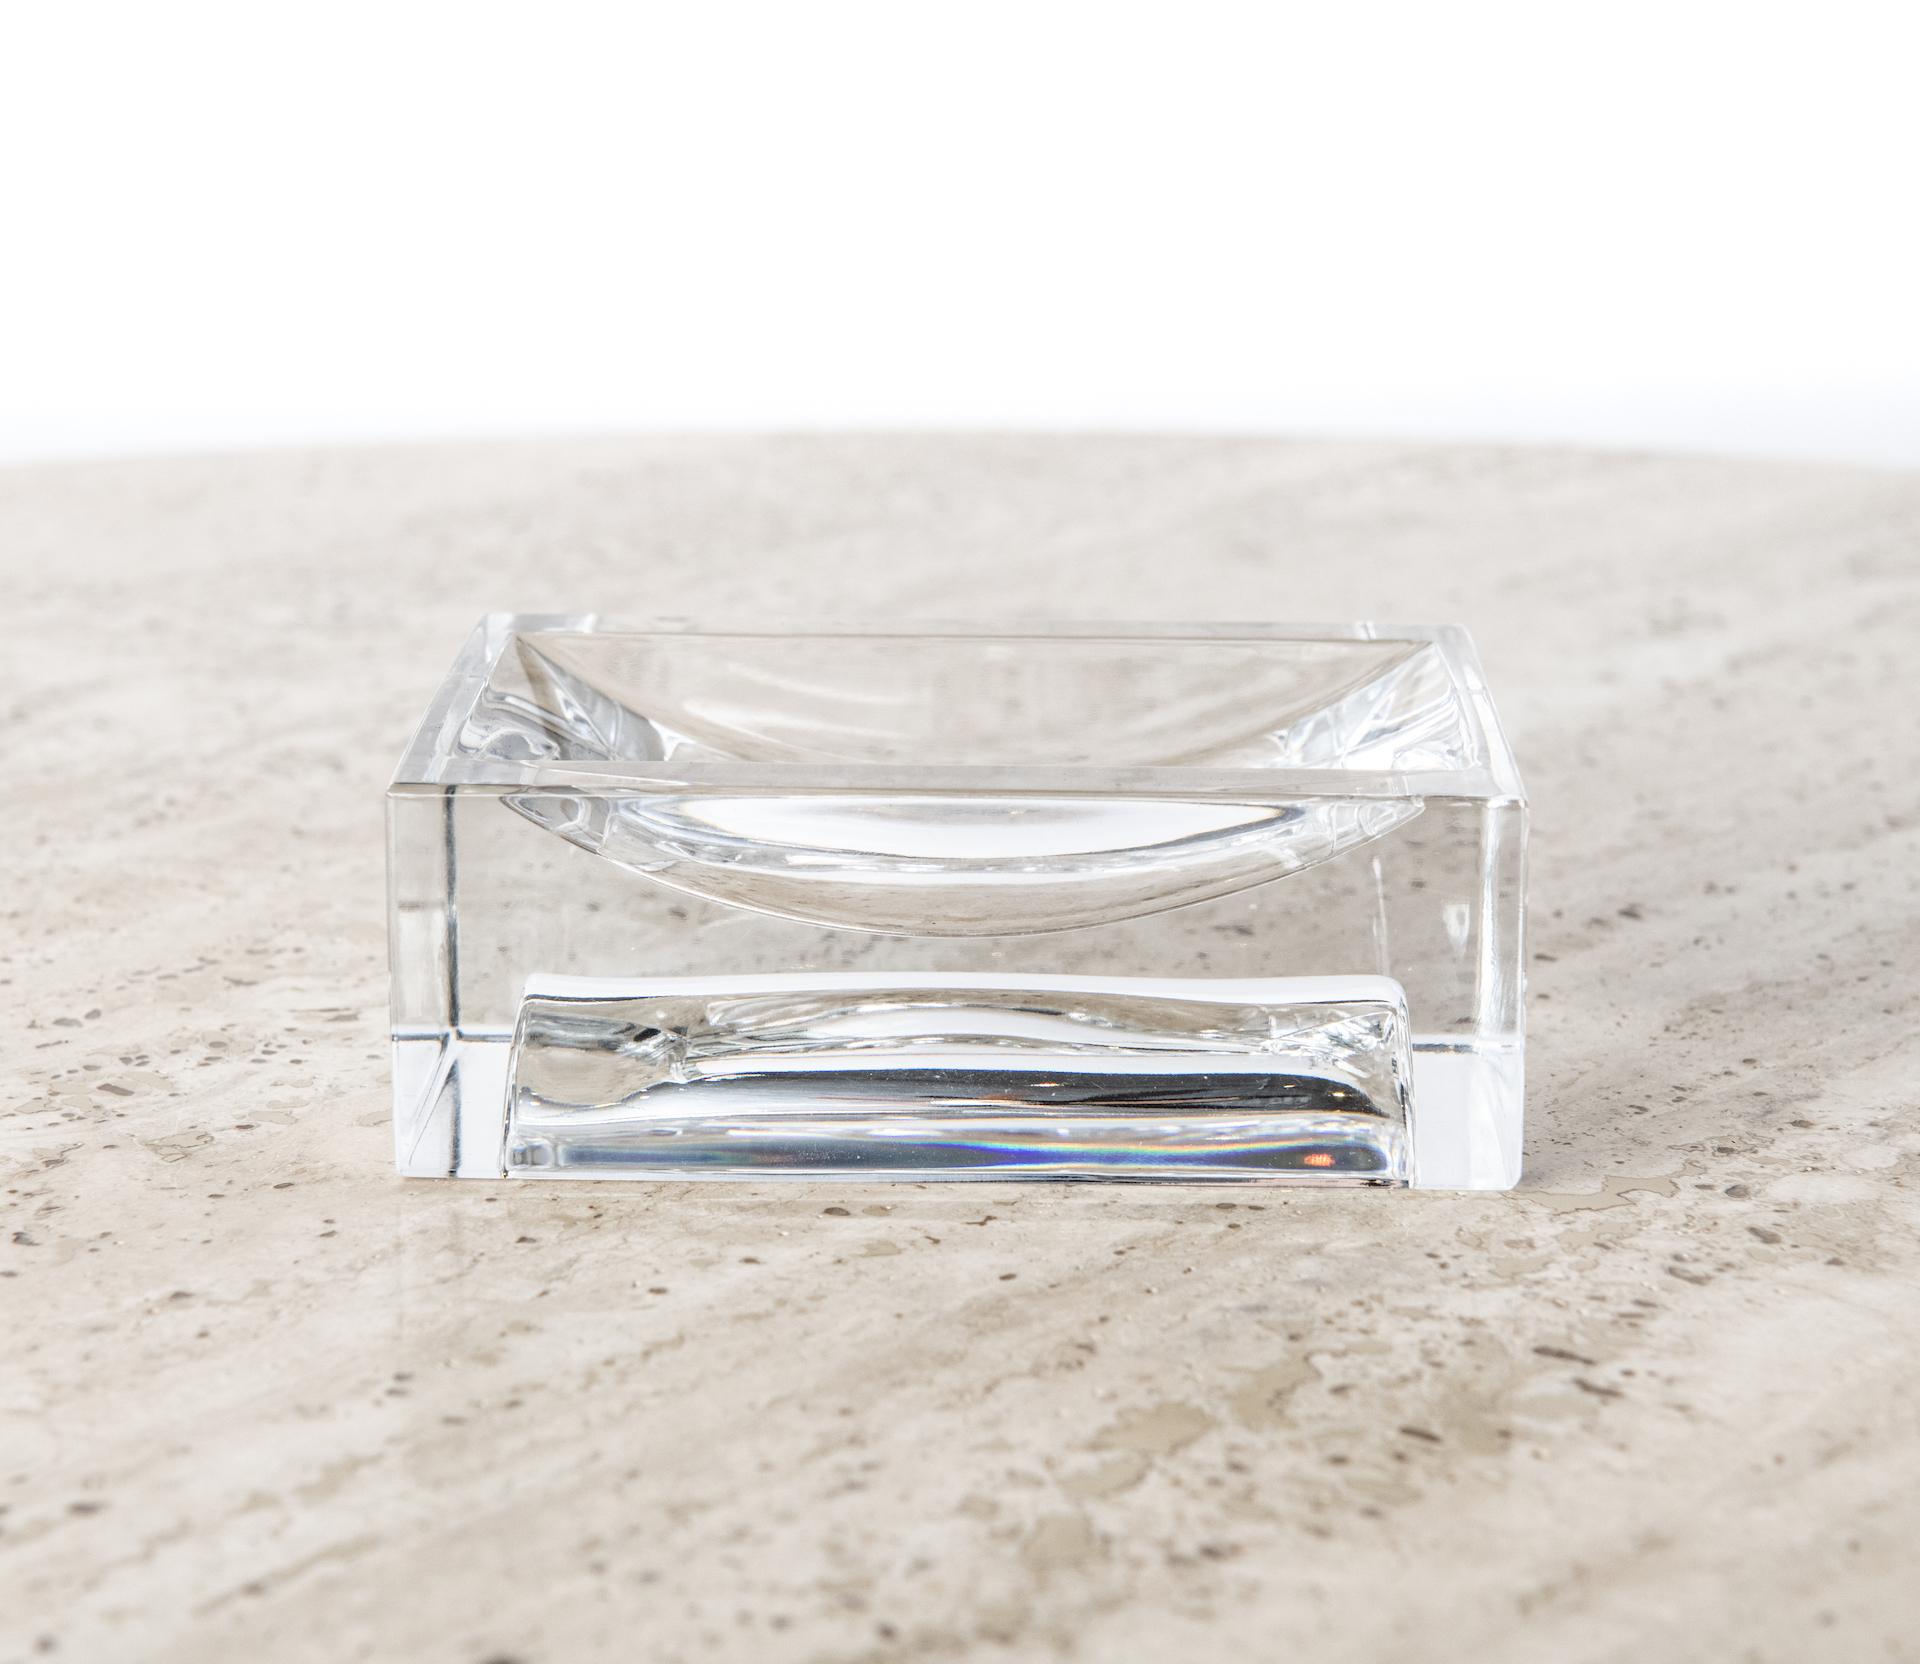 A scarce midcentury baccarat crystal business cardholder desk accessory, circa 1960s.